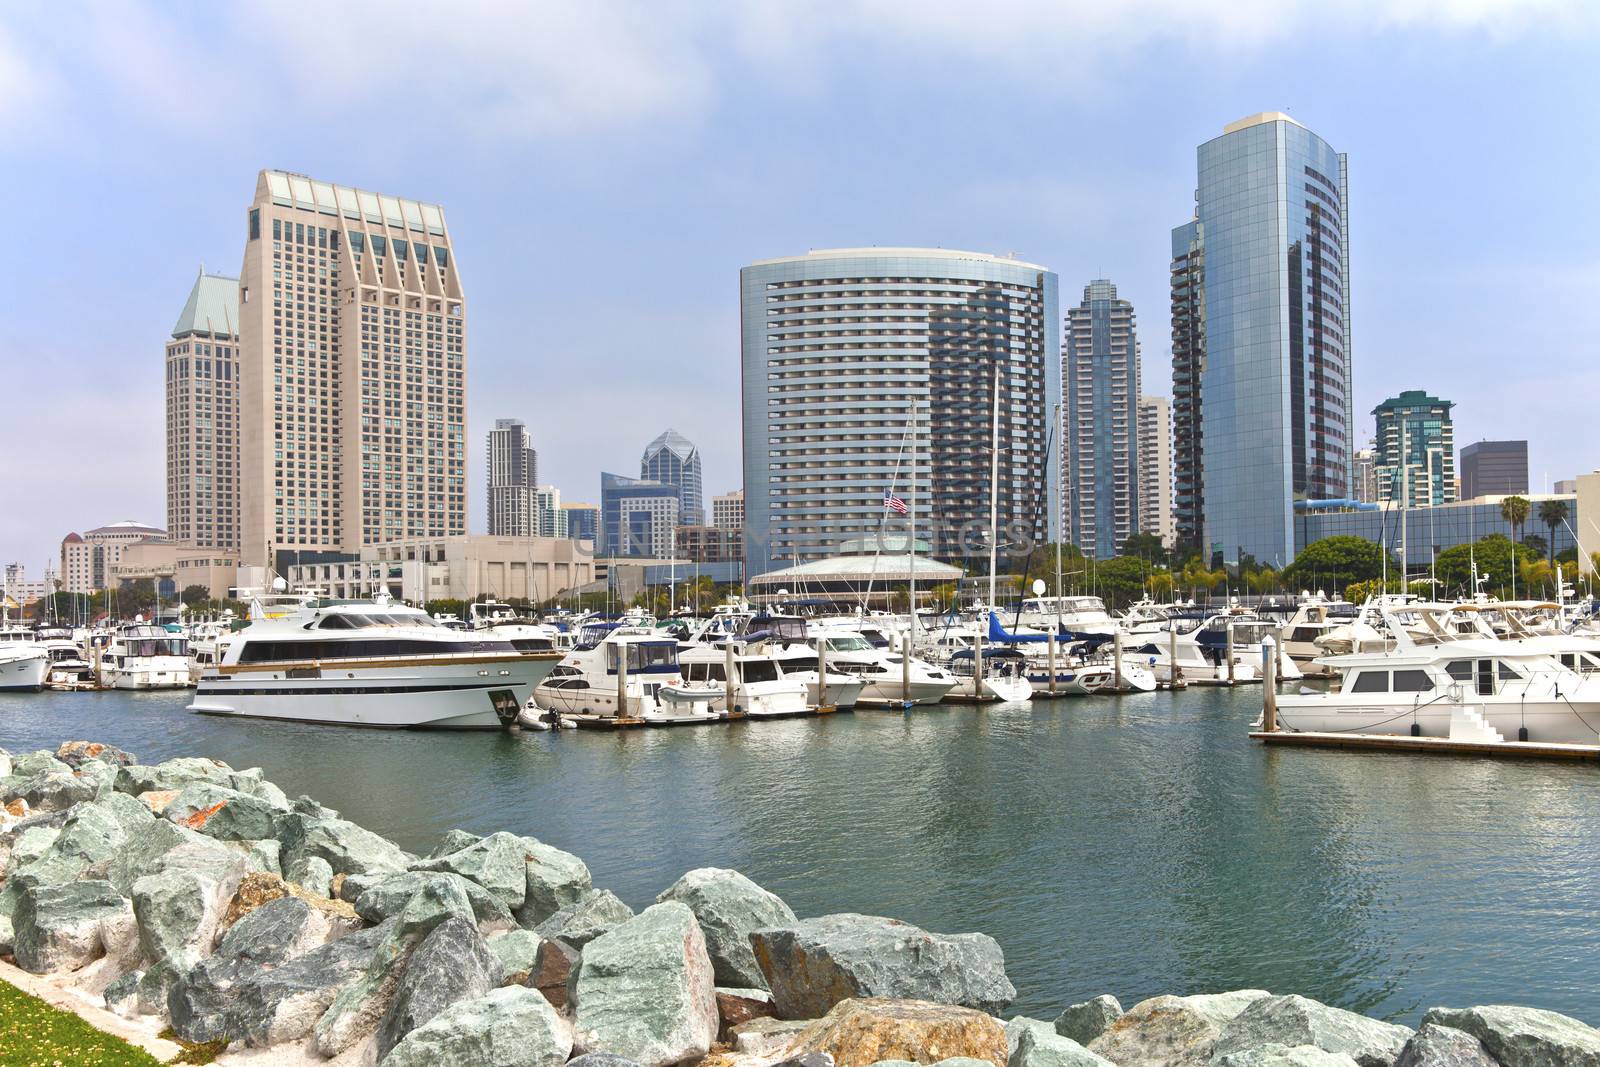 San Diego marina downtown buildings. by Rigucci